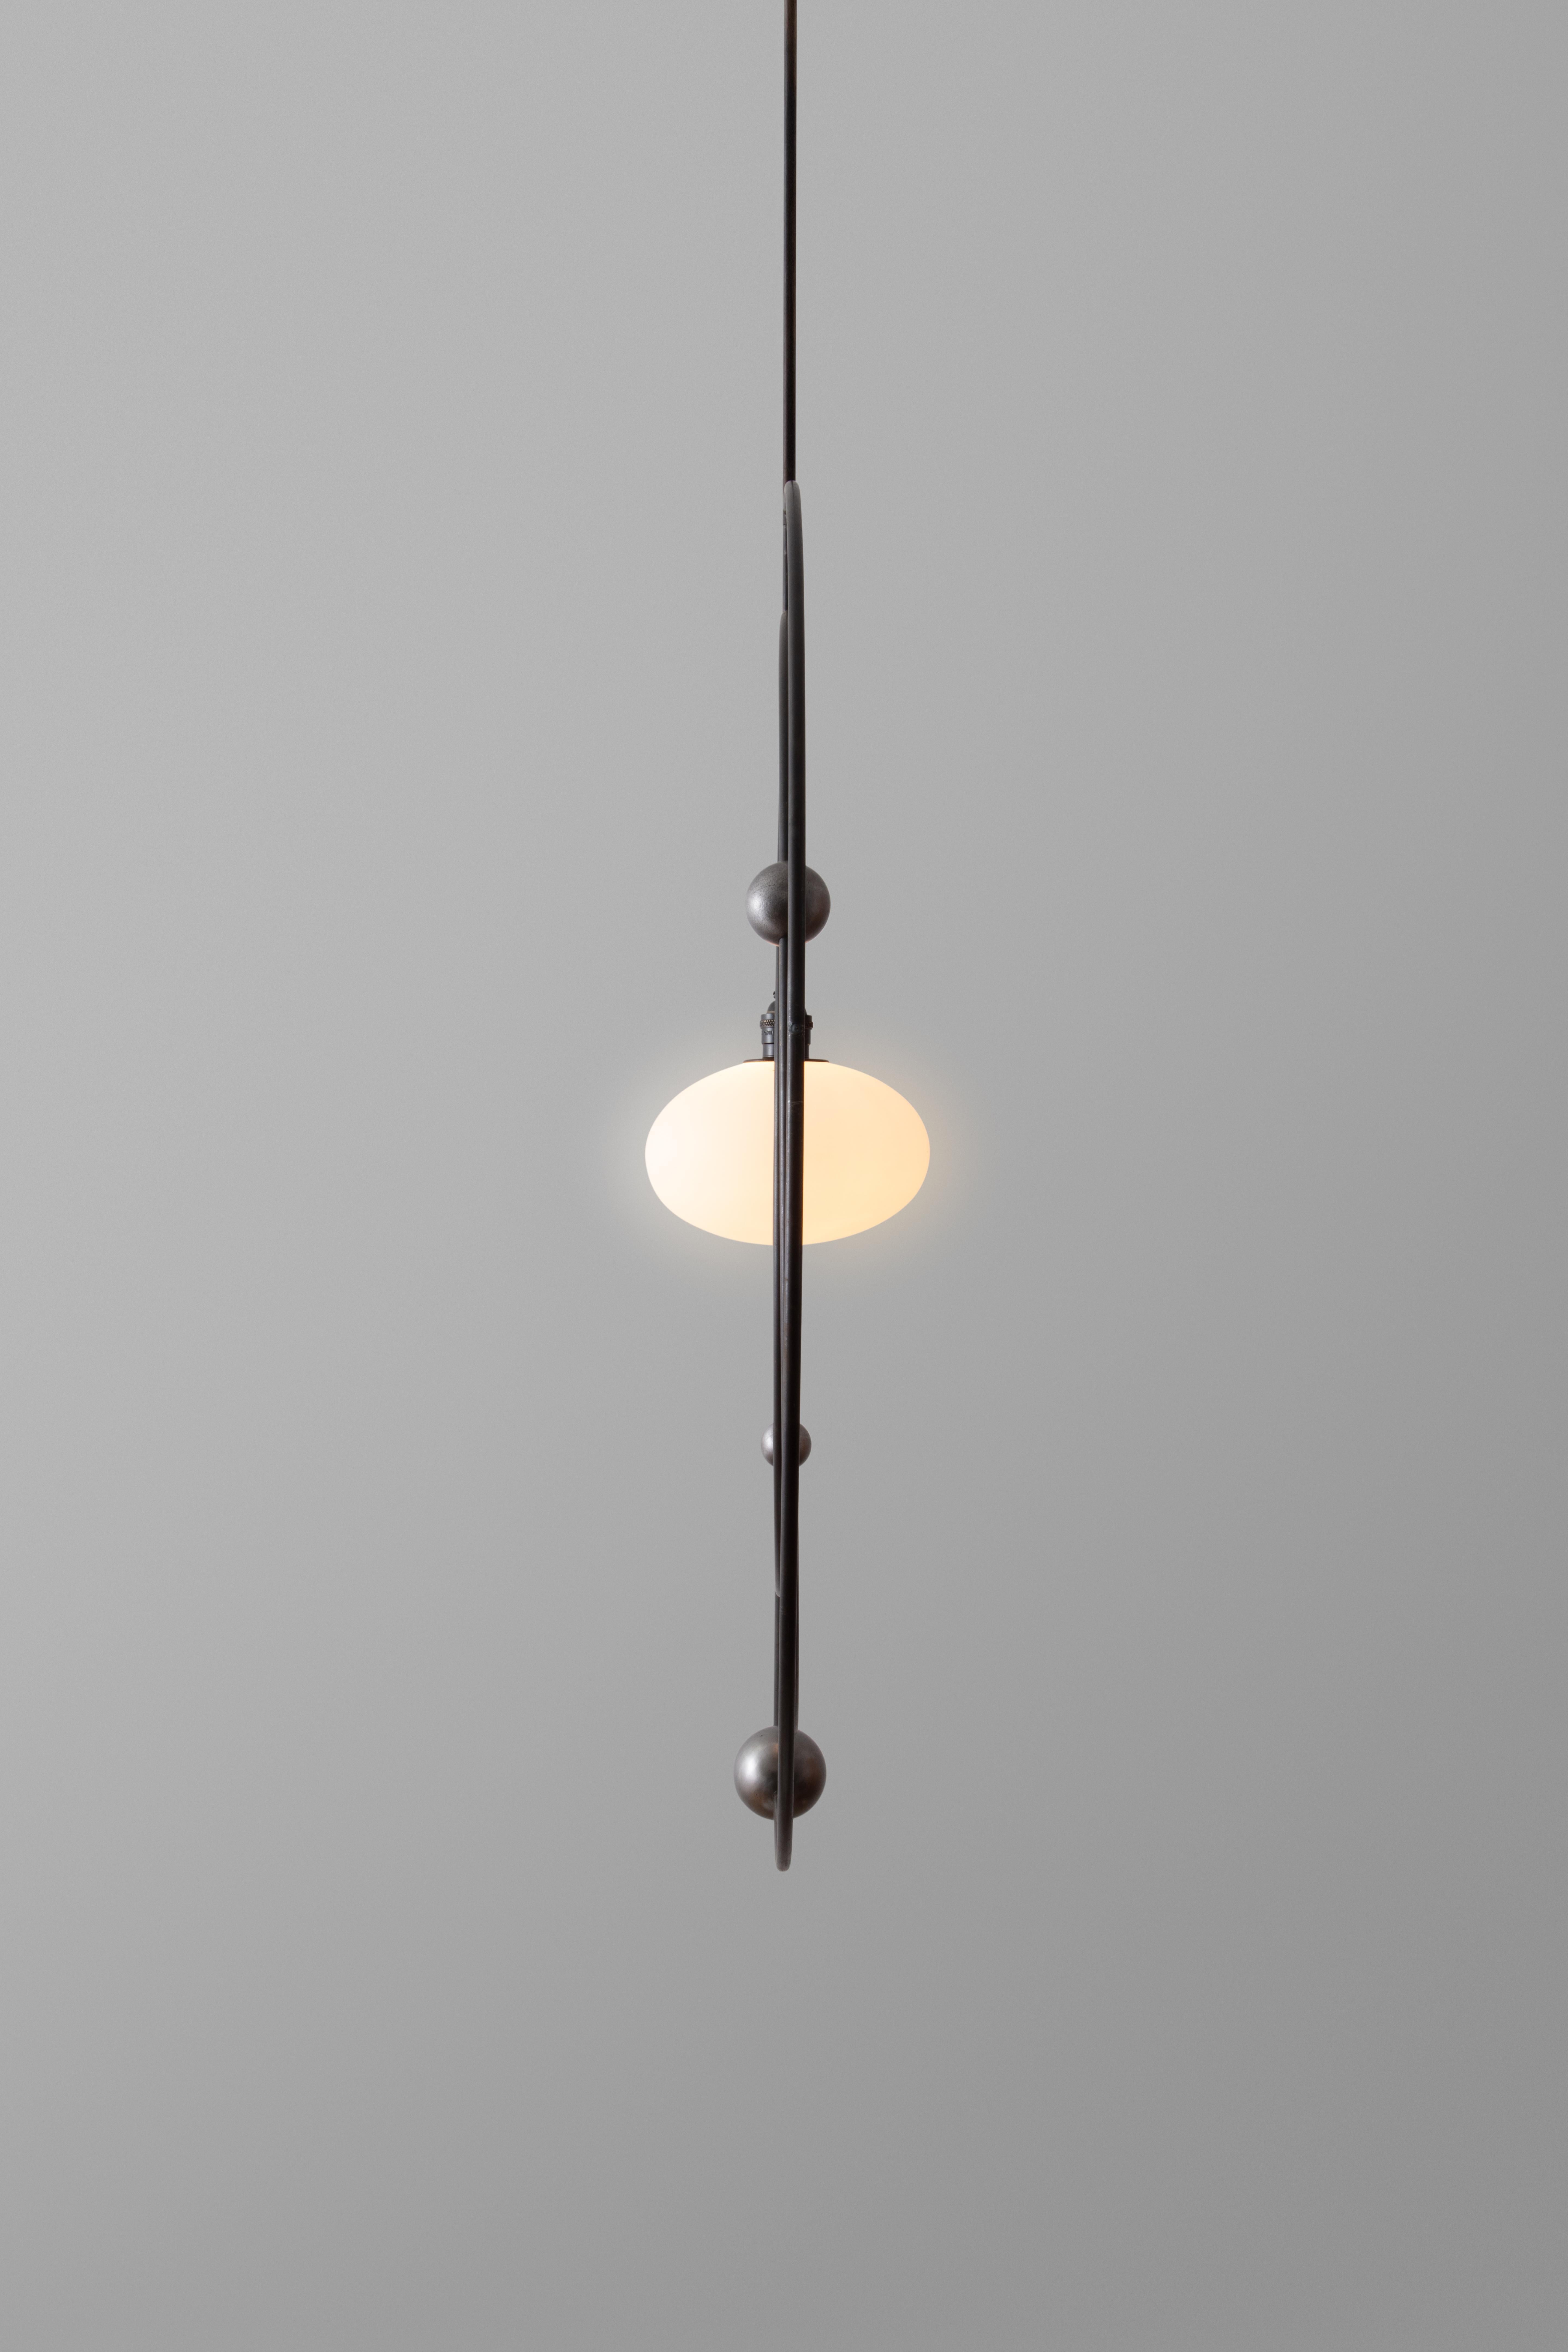 Modern Orbit Mobile Pendant Kinetic Sculpture w/ Blown Glass and Adorned Steel Rings For Sale